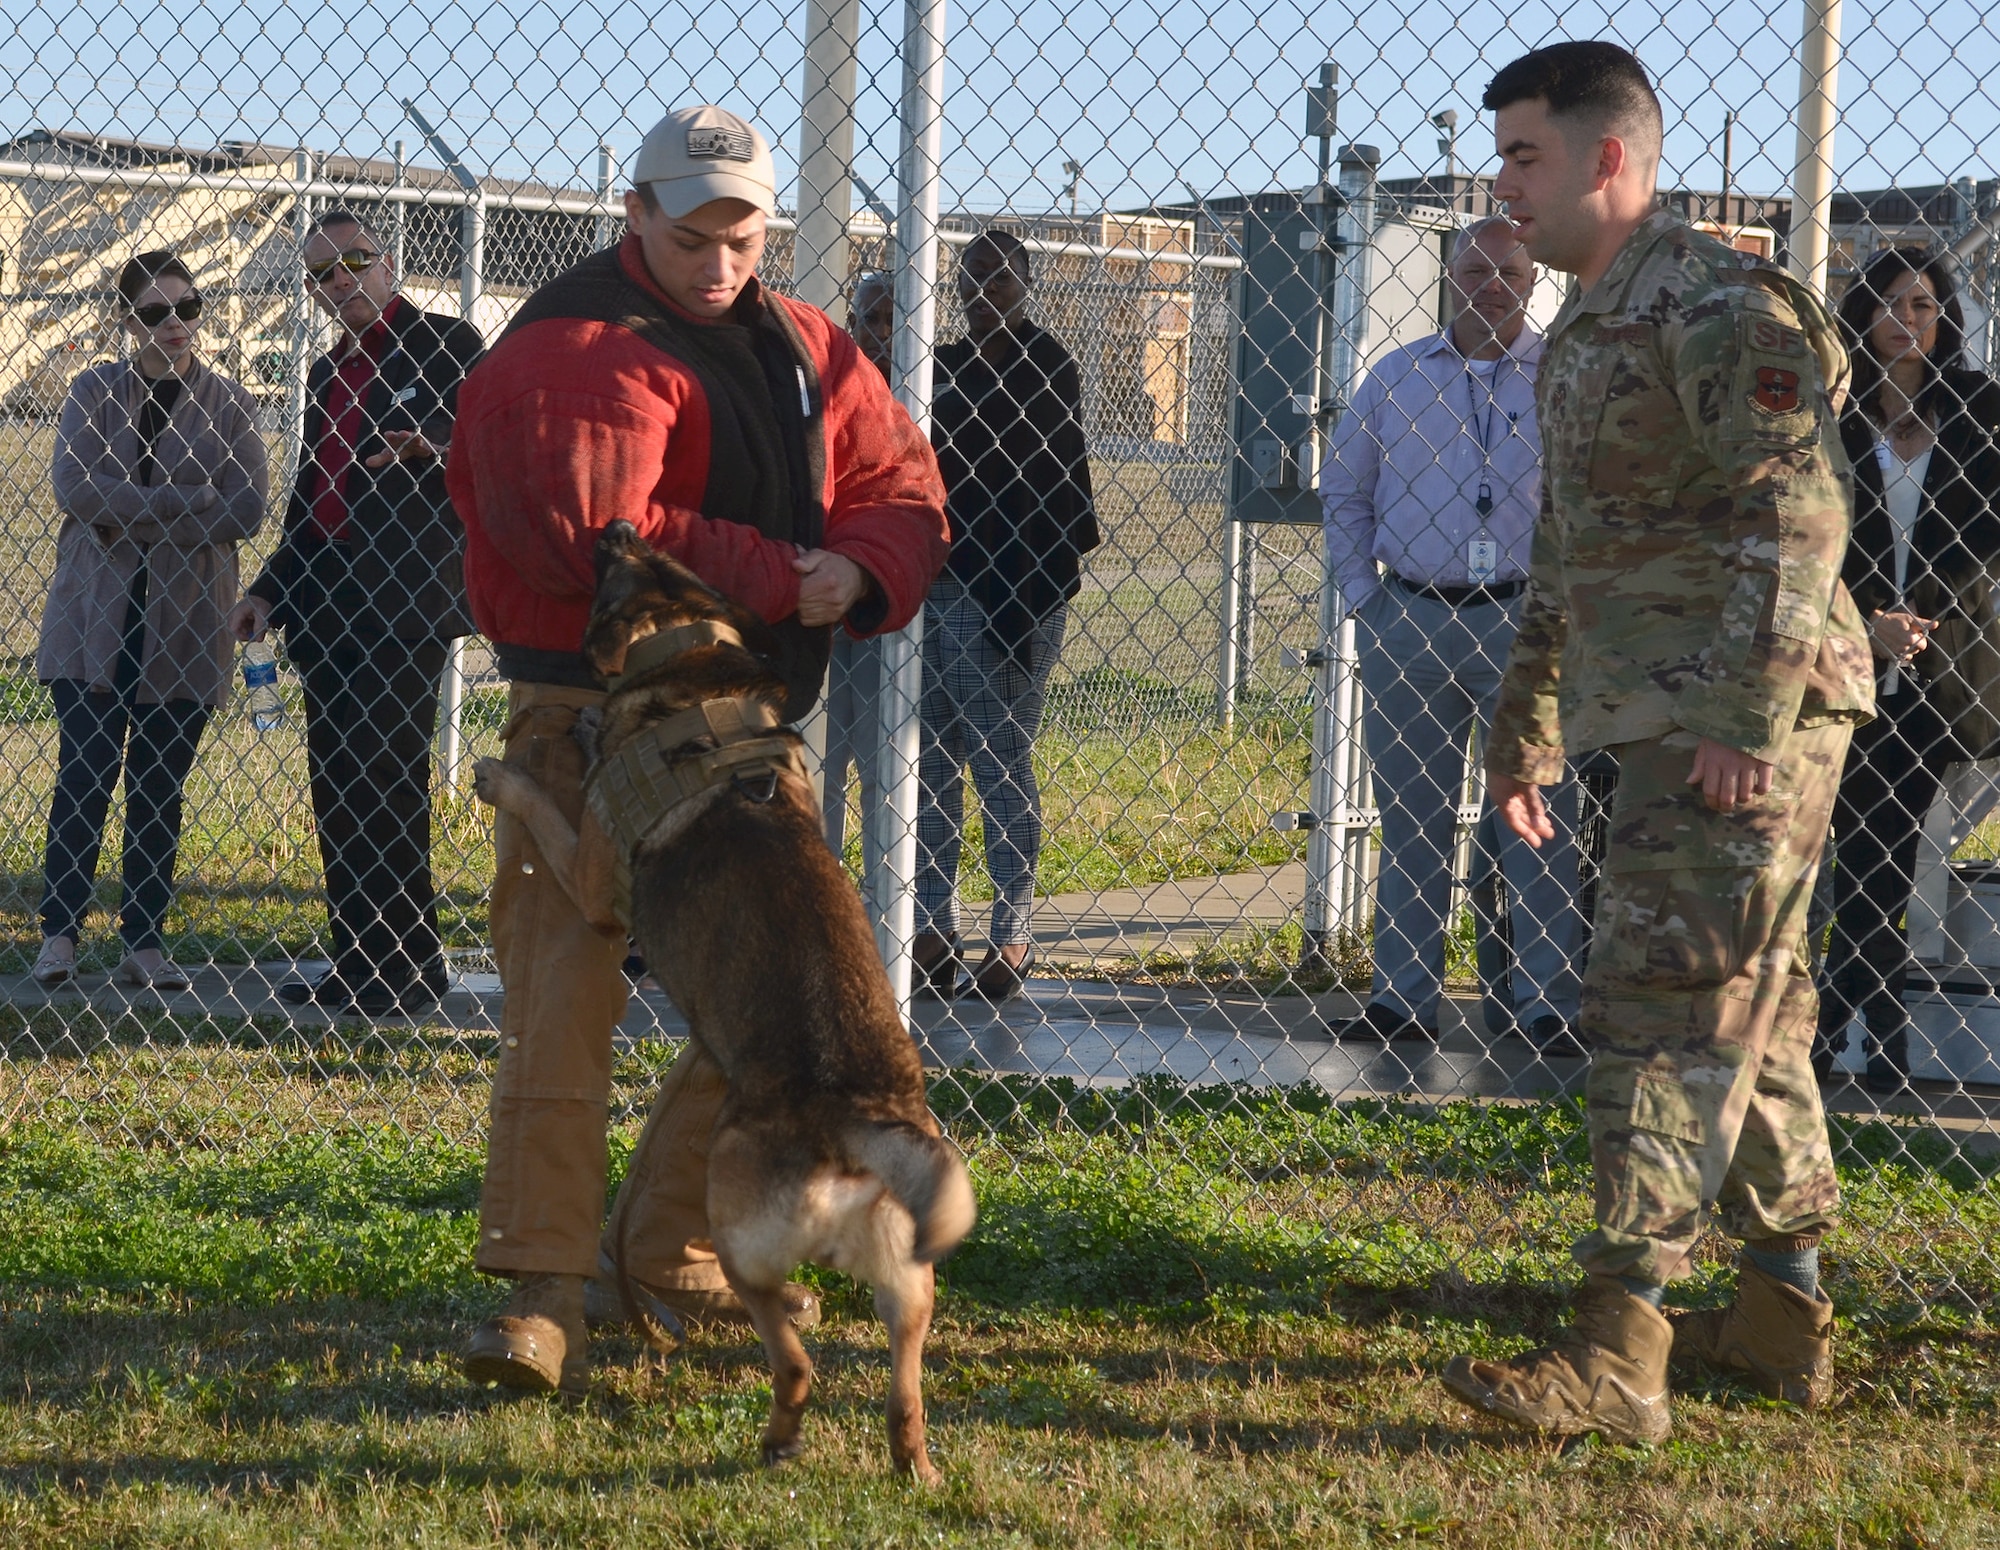 Staff Sgt. Matthew Erfman, 802nd Security Forces Squadron military working dog handler (left) and Staff Sgt. Sean Tucker, 802nd Security Forces Squadron military working dog handler (right) conduct a demonstration with military working dog Tarzan before a group of area school superintendents and administrators at Joint Base San Antonio-Lackland Annex Jan. 23. The group of 15 school superintendents and administrators toured JBSA-Lackland at the invitation of JBSA leaders.